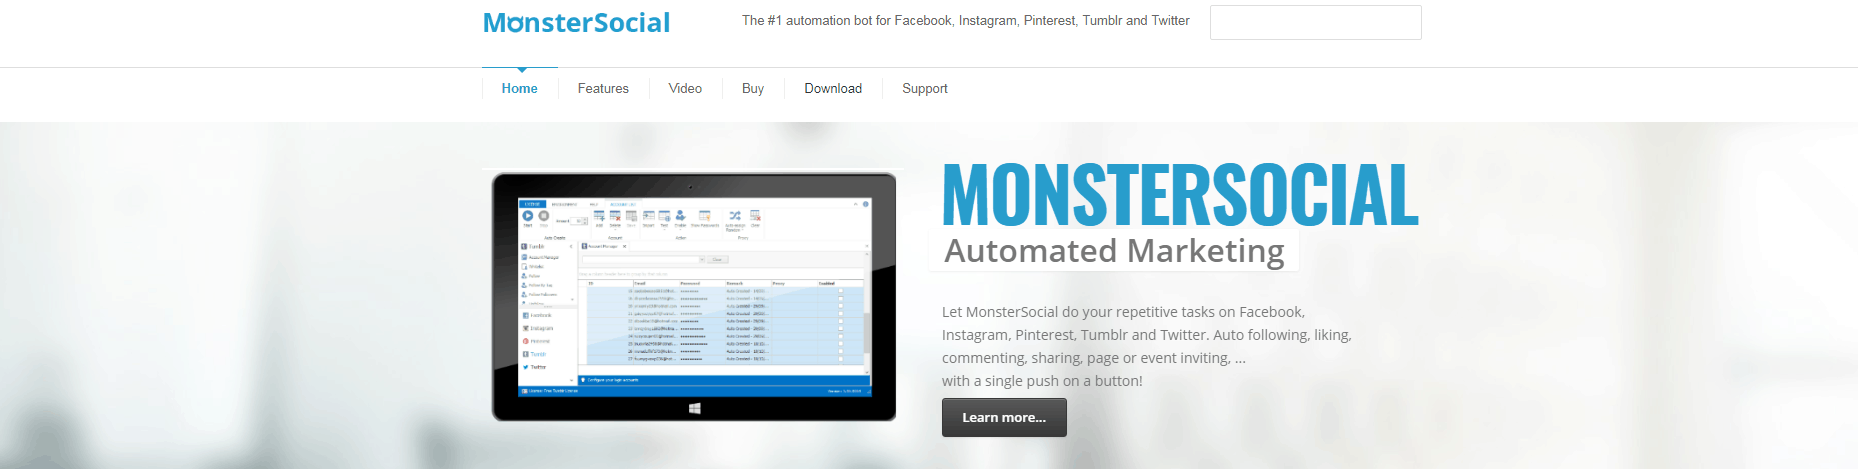 photo credits monstersocial - buy instagram impressions and auto at 1 75 up to 50k instant